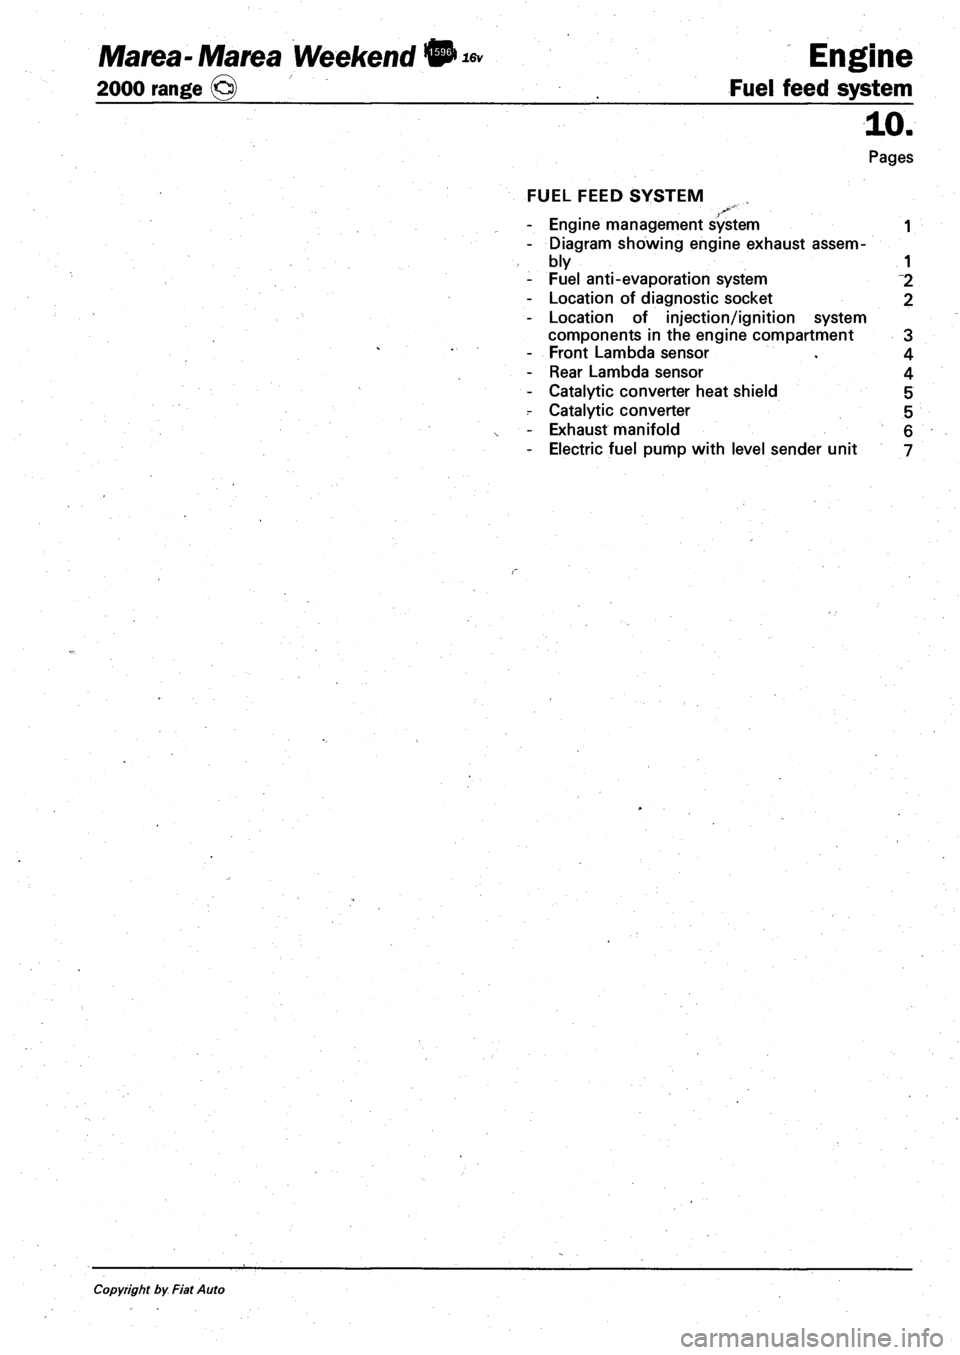 FIAT MAREA 2001 1.G Service Manual Marea- Marea Weekend • *» Engine 
2000 range (§) Fuel feed system 
10. 
Pages 
FUEL FEED SYSTEM 
- Engine management system 1 
- Diagram showing engine exhaust assem­
bly 1 
- Fuel anti-evaporati